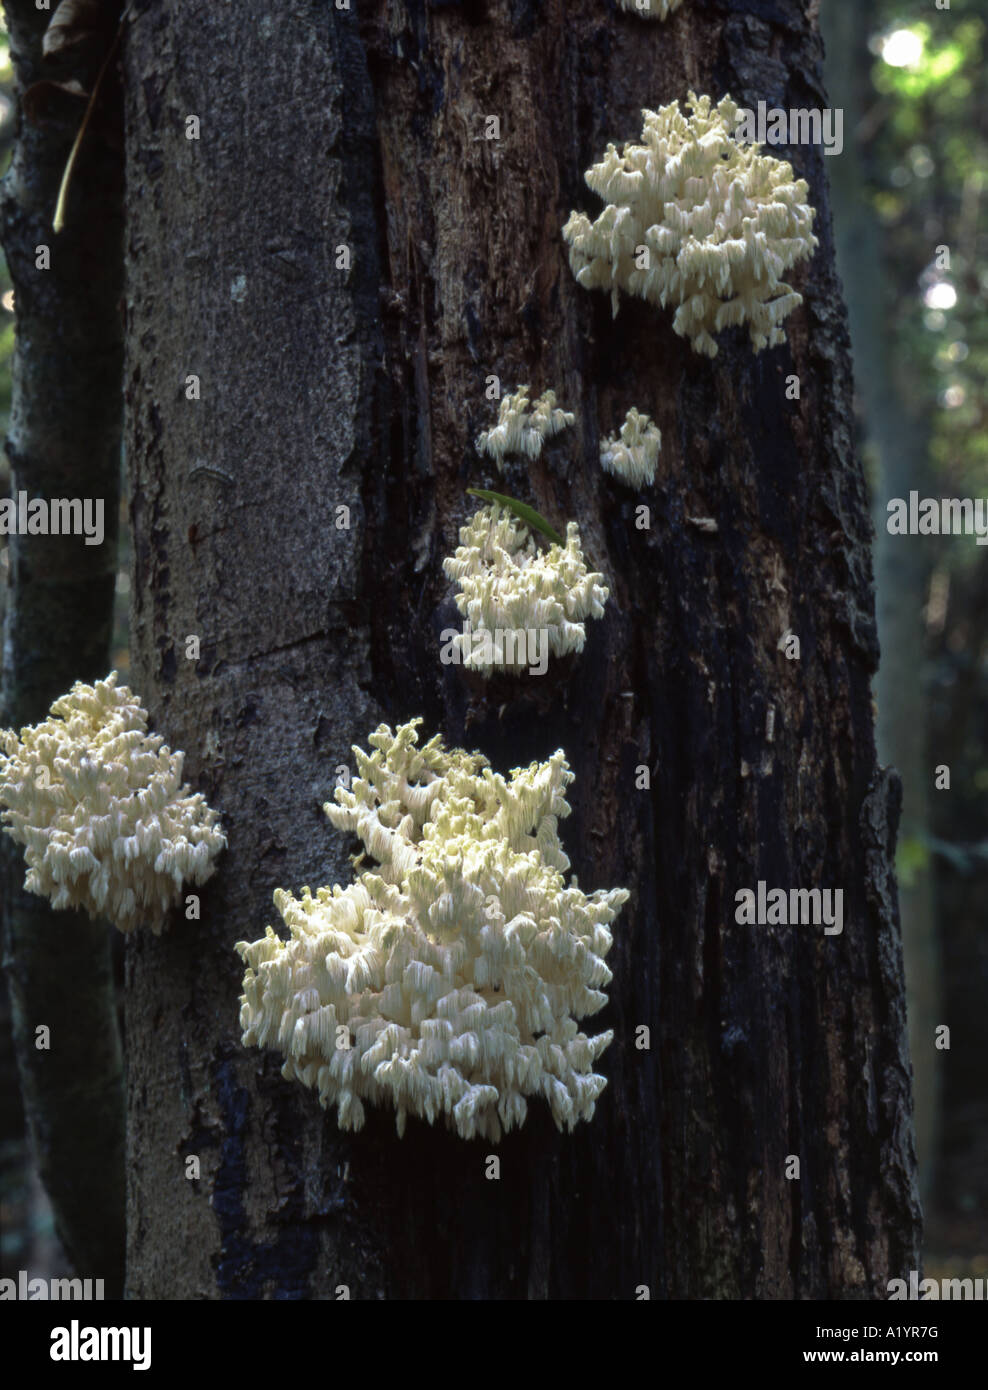 Coral Tooth Hericium coralloides. Attached to decaying Beech trunk Ebernoe Forest England Stock Photo